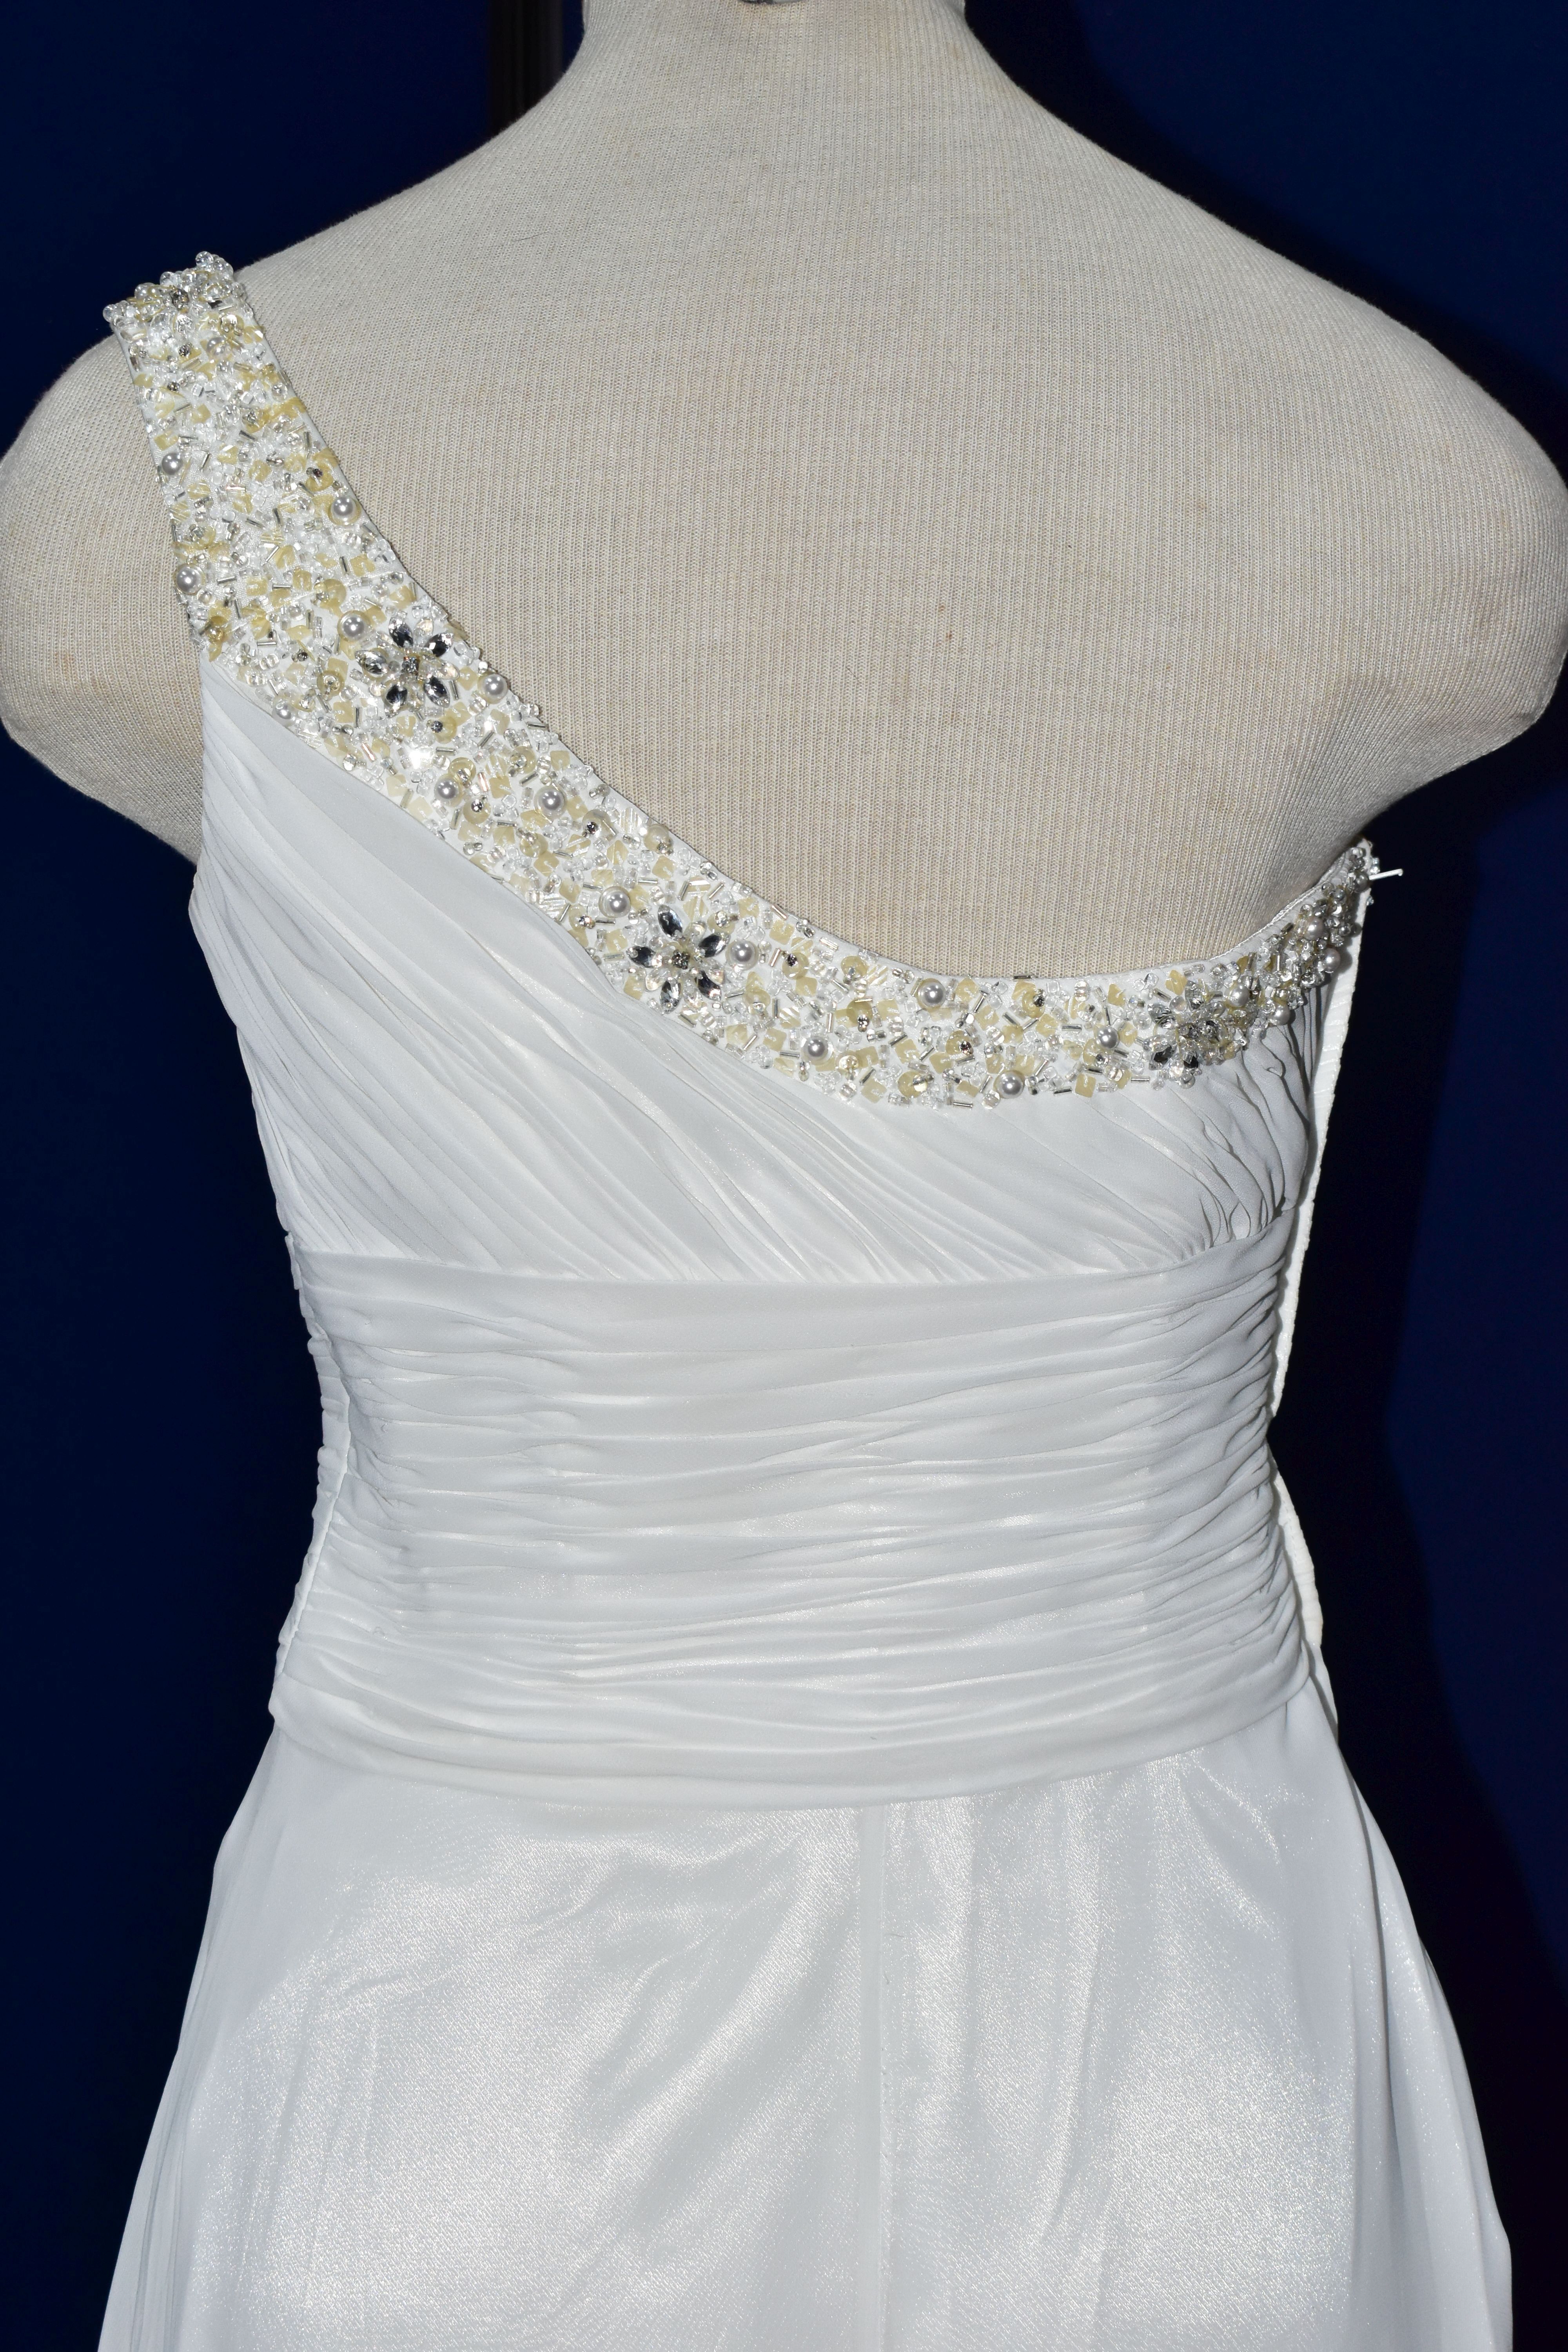 WEDDING DRESS, ruched bodice, one shoulder, ivory, Grecian style, approximate size 8/10 (1) - Image 2 of 5